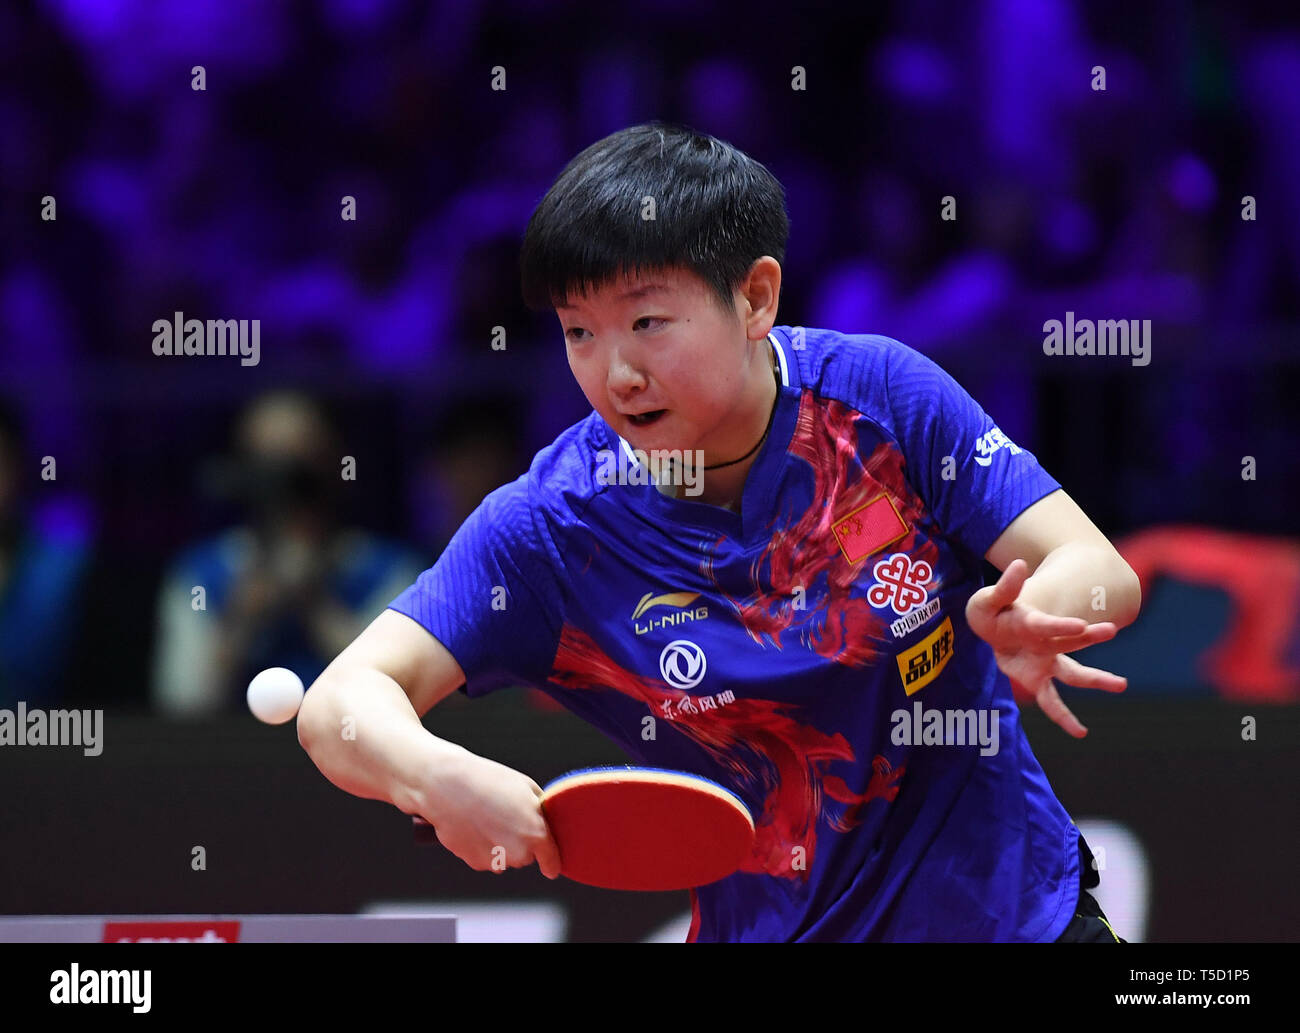 Budapest. 24th Apr, 2019. Sun Yingsha of China competes during the women's  singles round of 32 match between Sun Yingsha of China and Ito Mima of  Japan at 2019 ITTF World Table